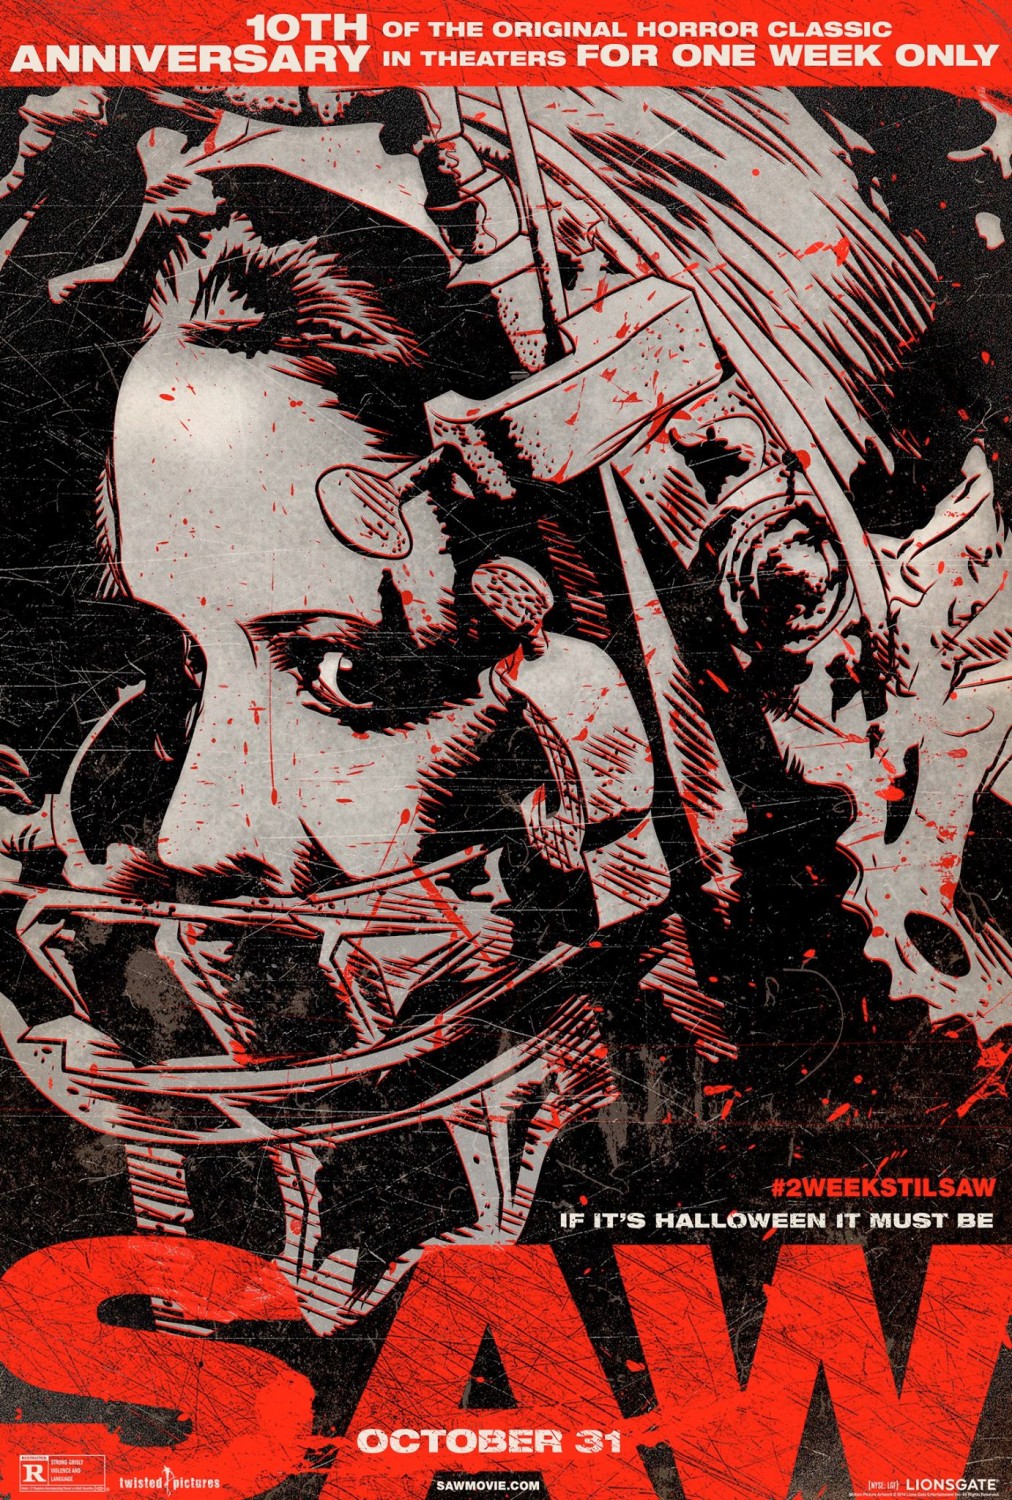 Extra Large Movie Poster Image for Saw (#12 of 14)